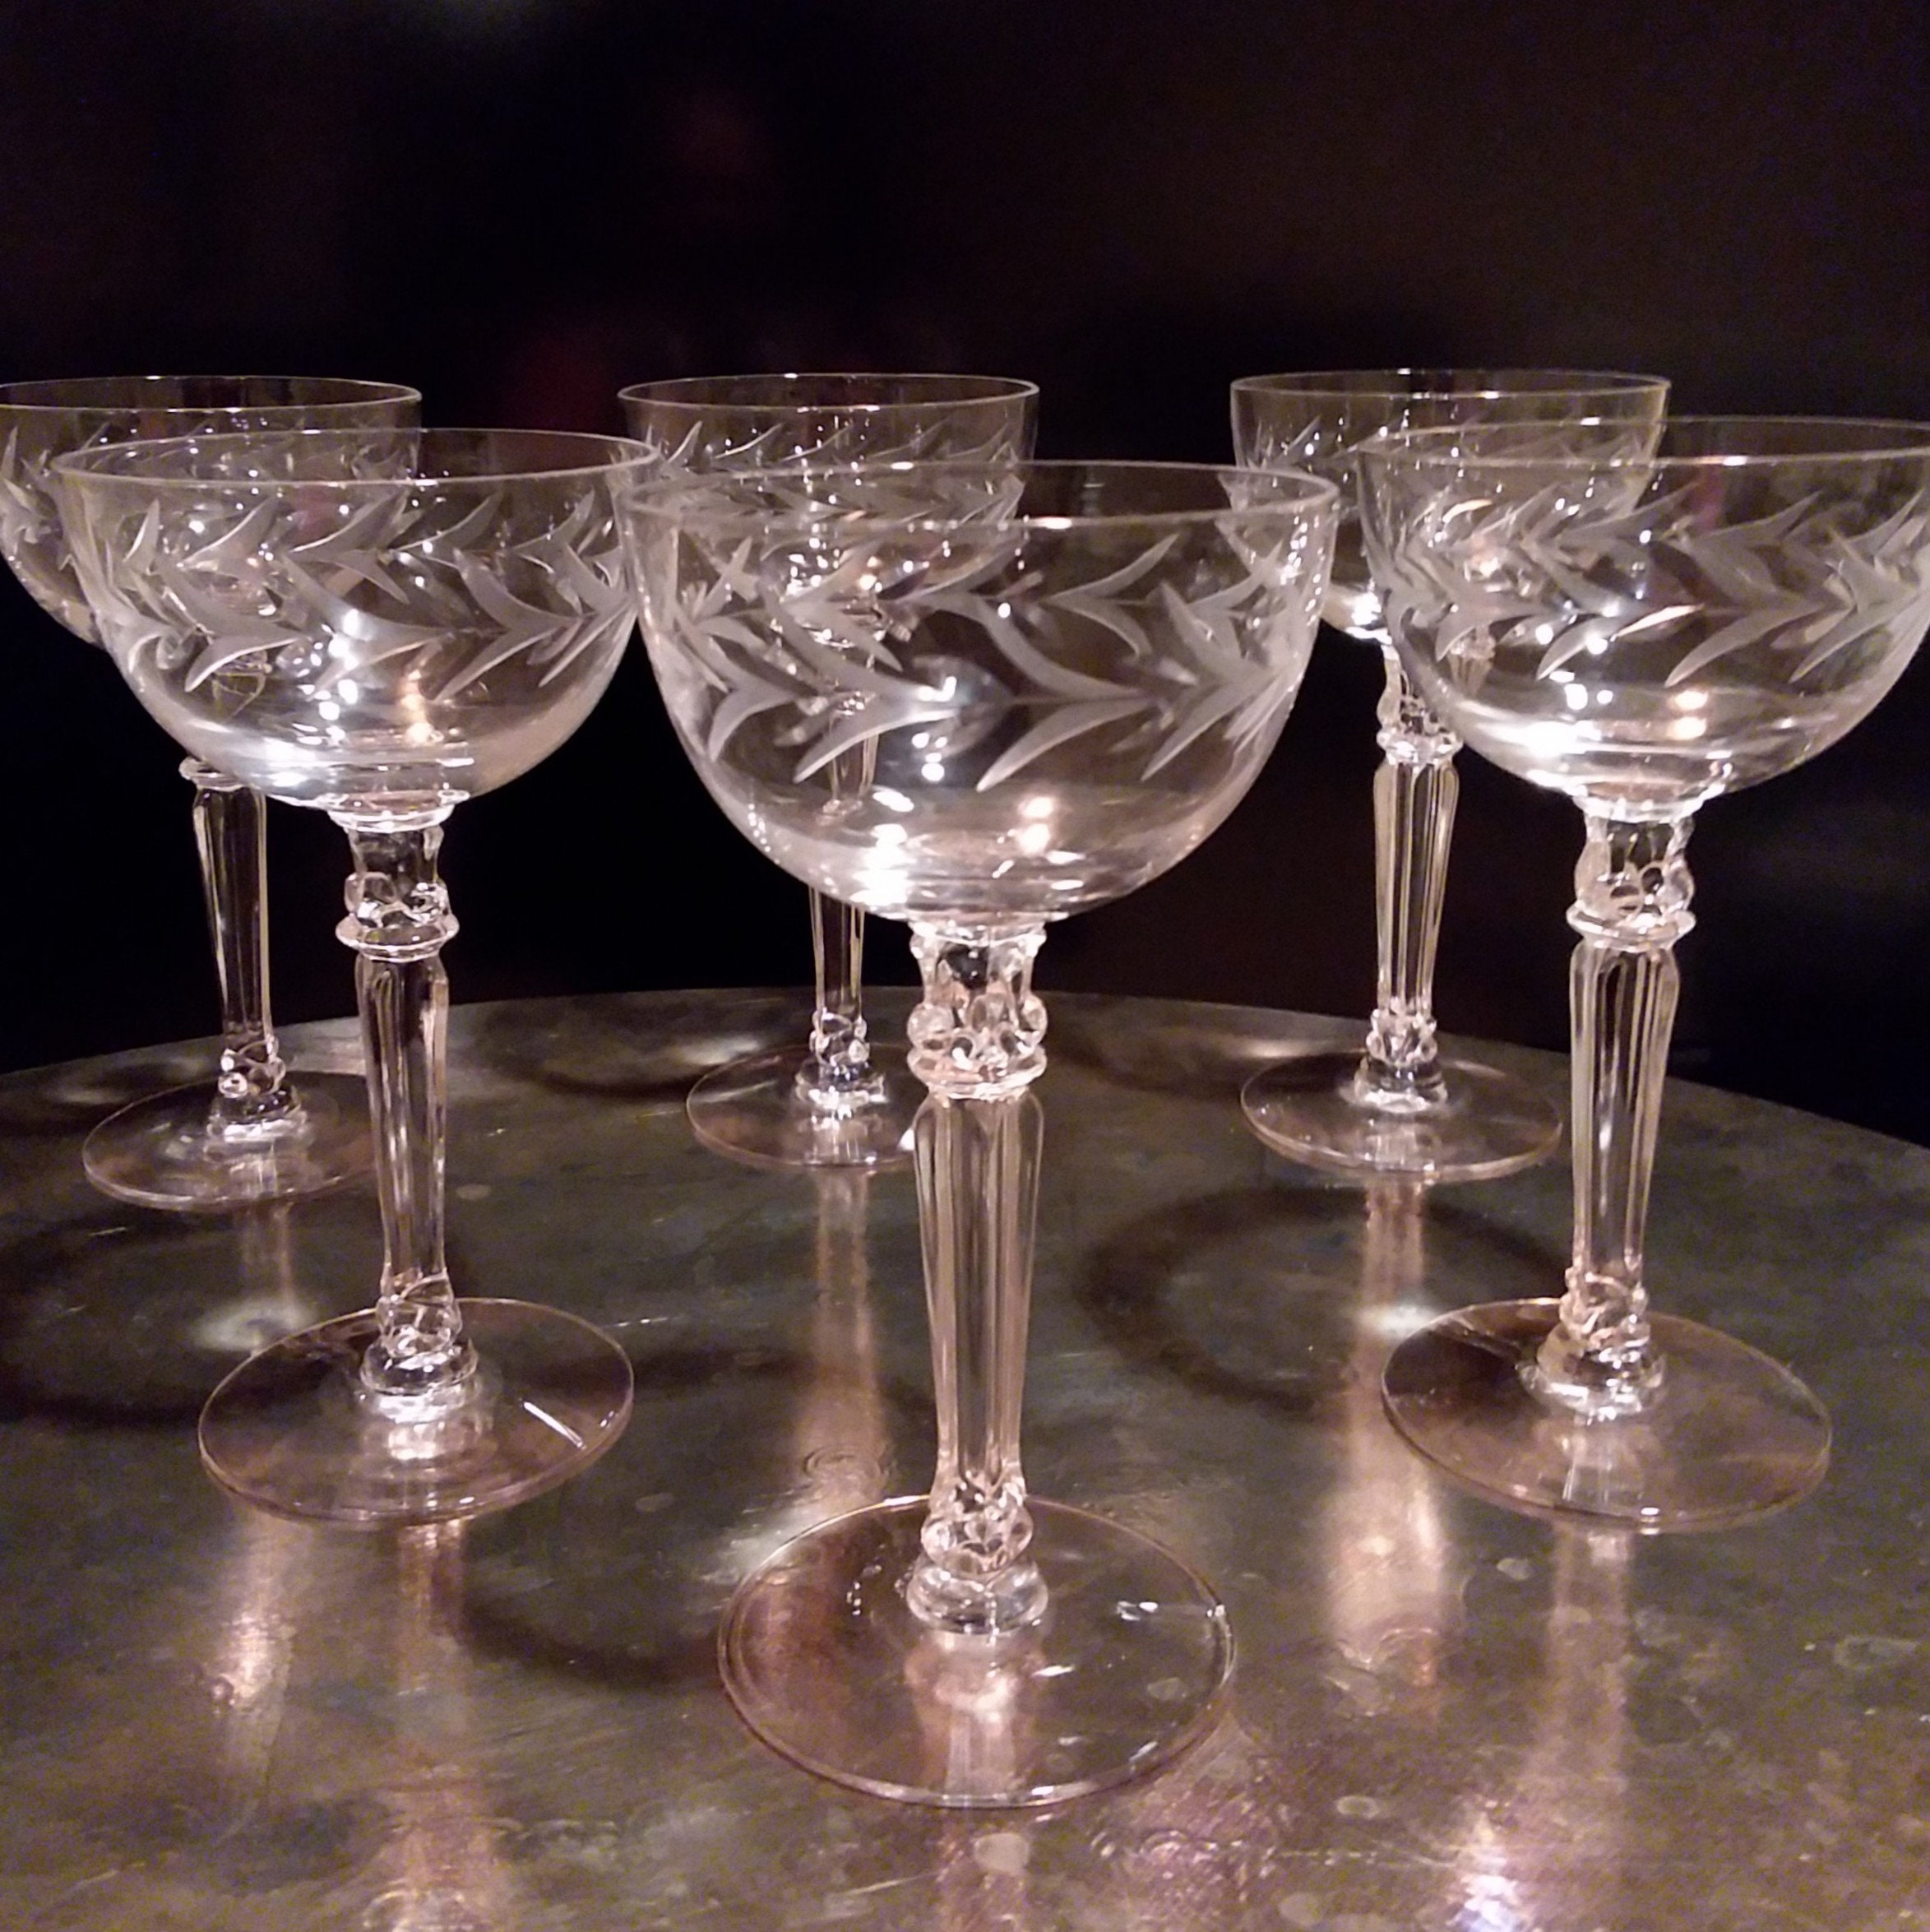 Set of 4 Crystal Wine Glasses, 17.5 Cl, Chantilly Pattern by Cristal De  France. Home Barware, Crystal Glassware, C.1990s 